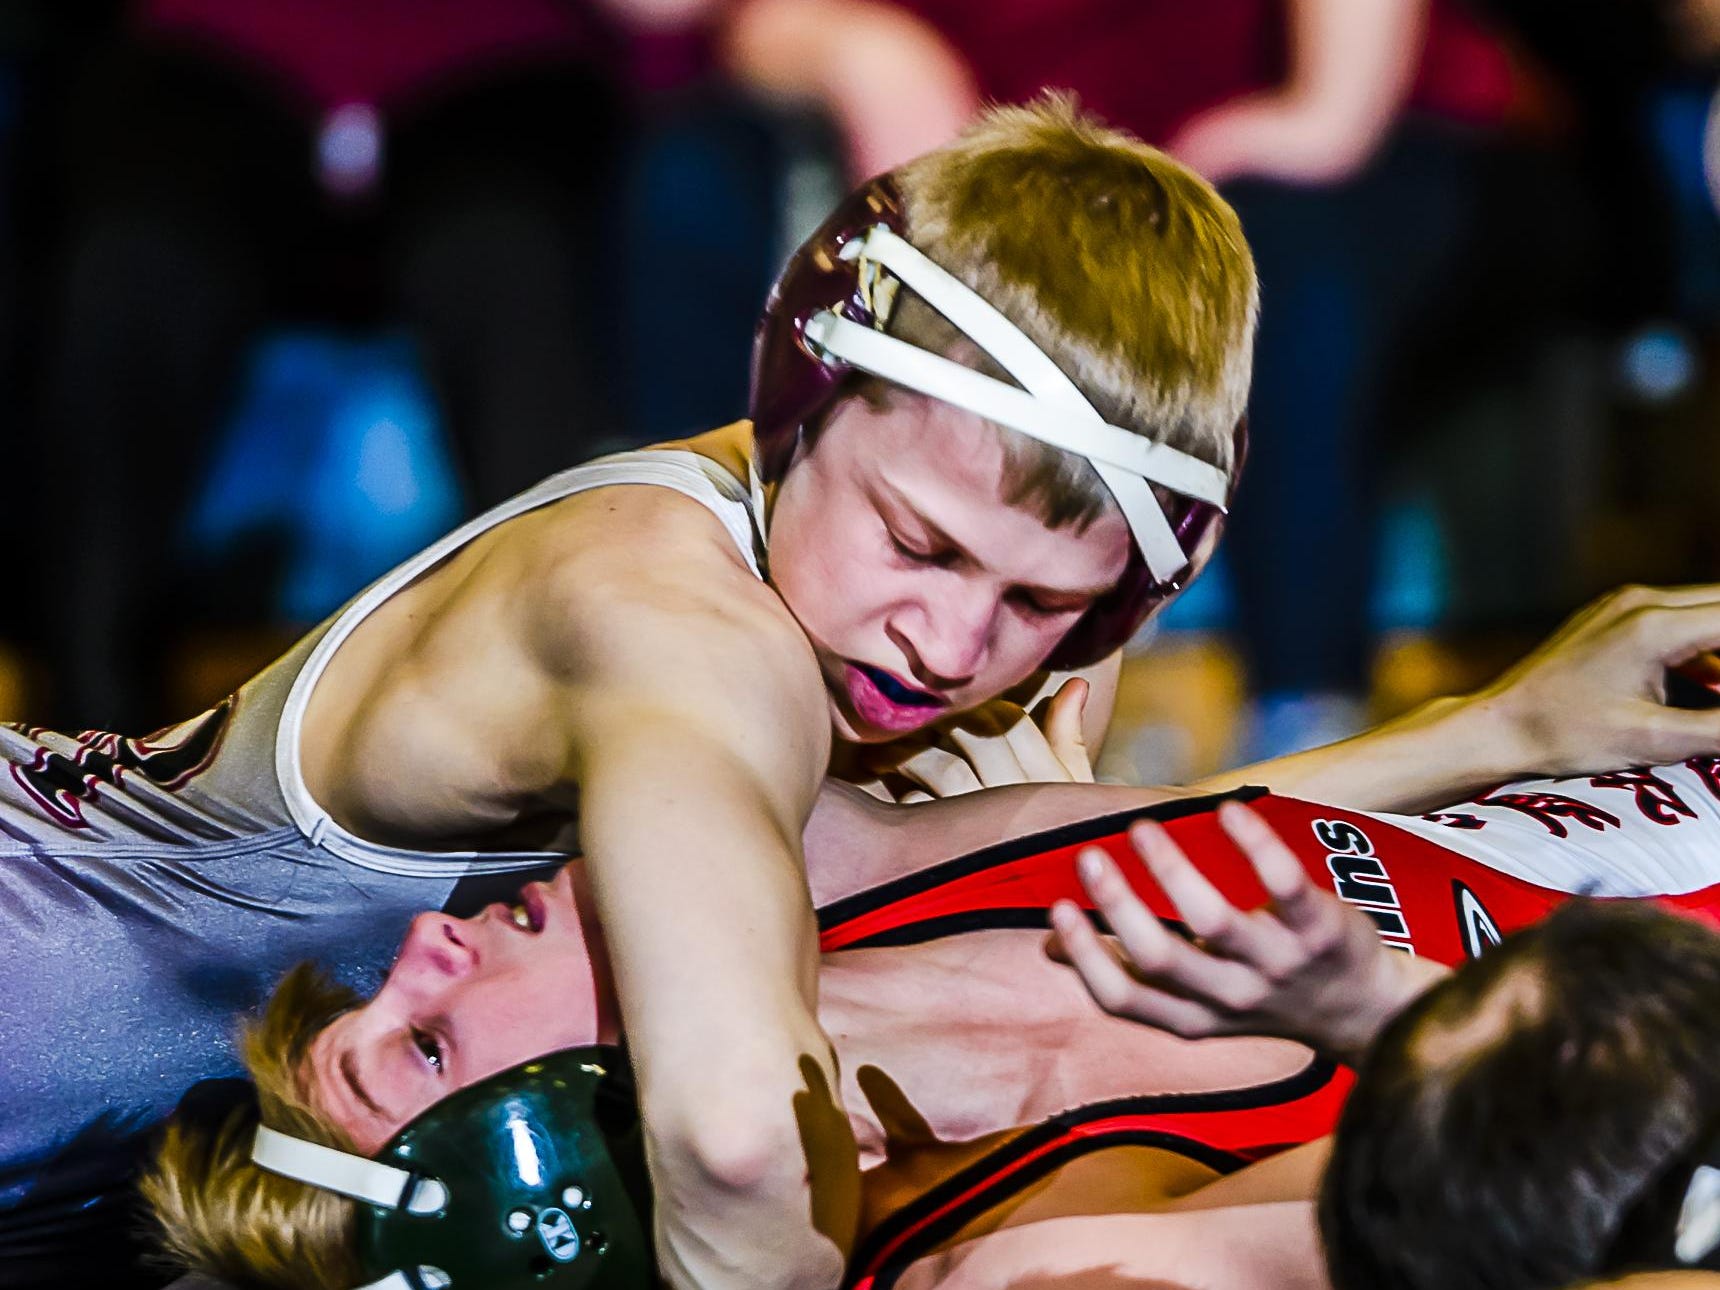 Tyler Koehn,top, of Eaton Rapids gets a near pin on Brendon Smith of St. Johns during their 103lb. match in their Division 2 Regional final Wednesday February 17, 2016 in Mason. Koehn would win by a fall.